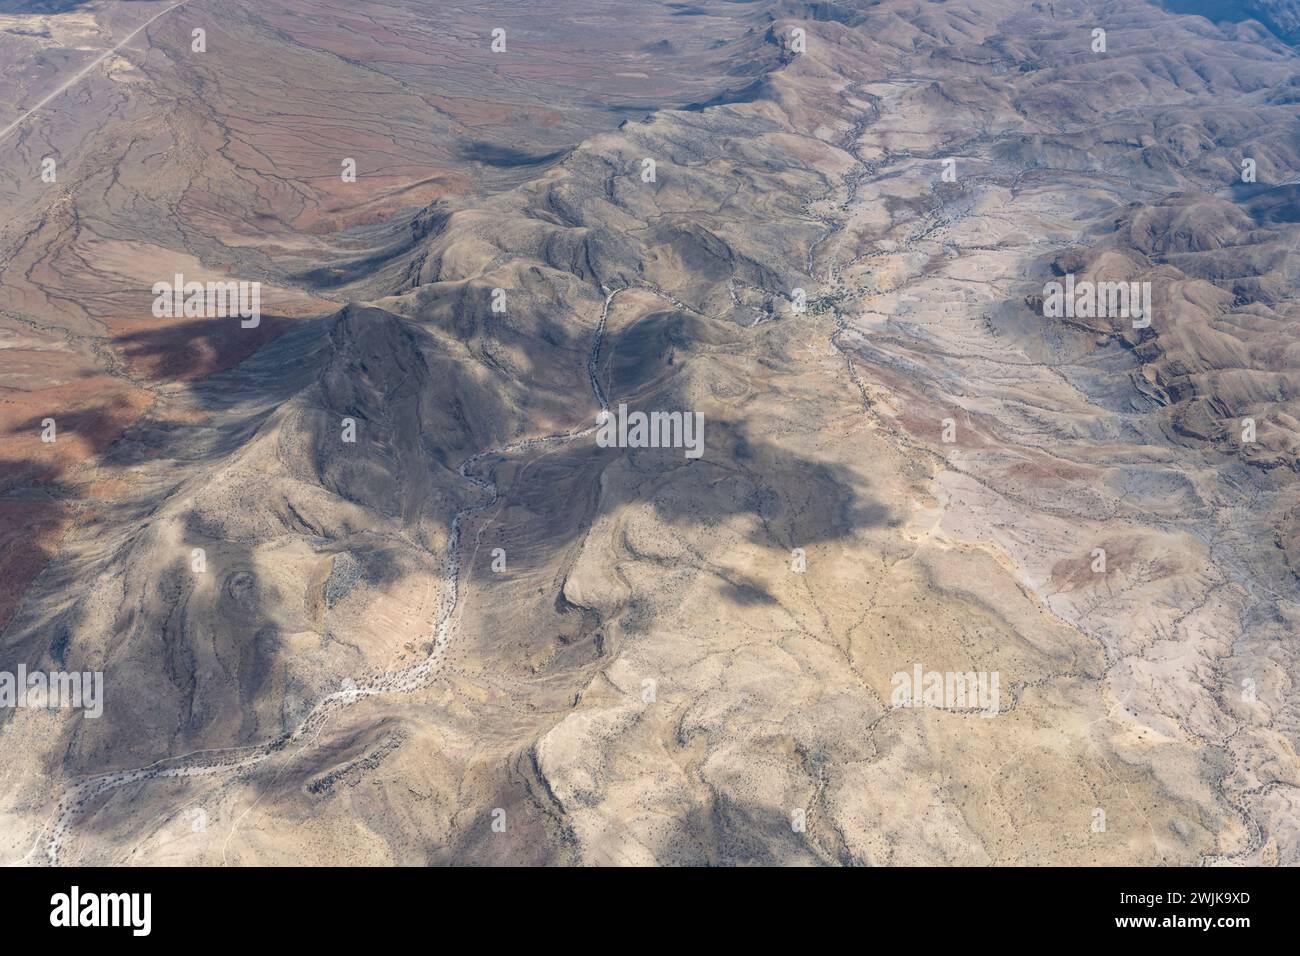 aerial landscape with mountain range at hilly  desert, shot from a glider plane in bright late spring light east of Bullsport, Namibia, Africa Stock Photo